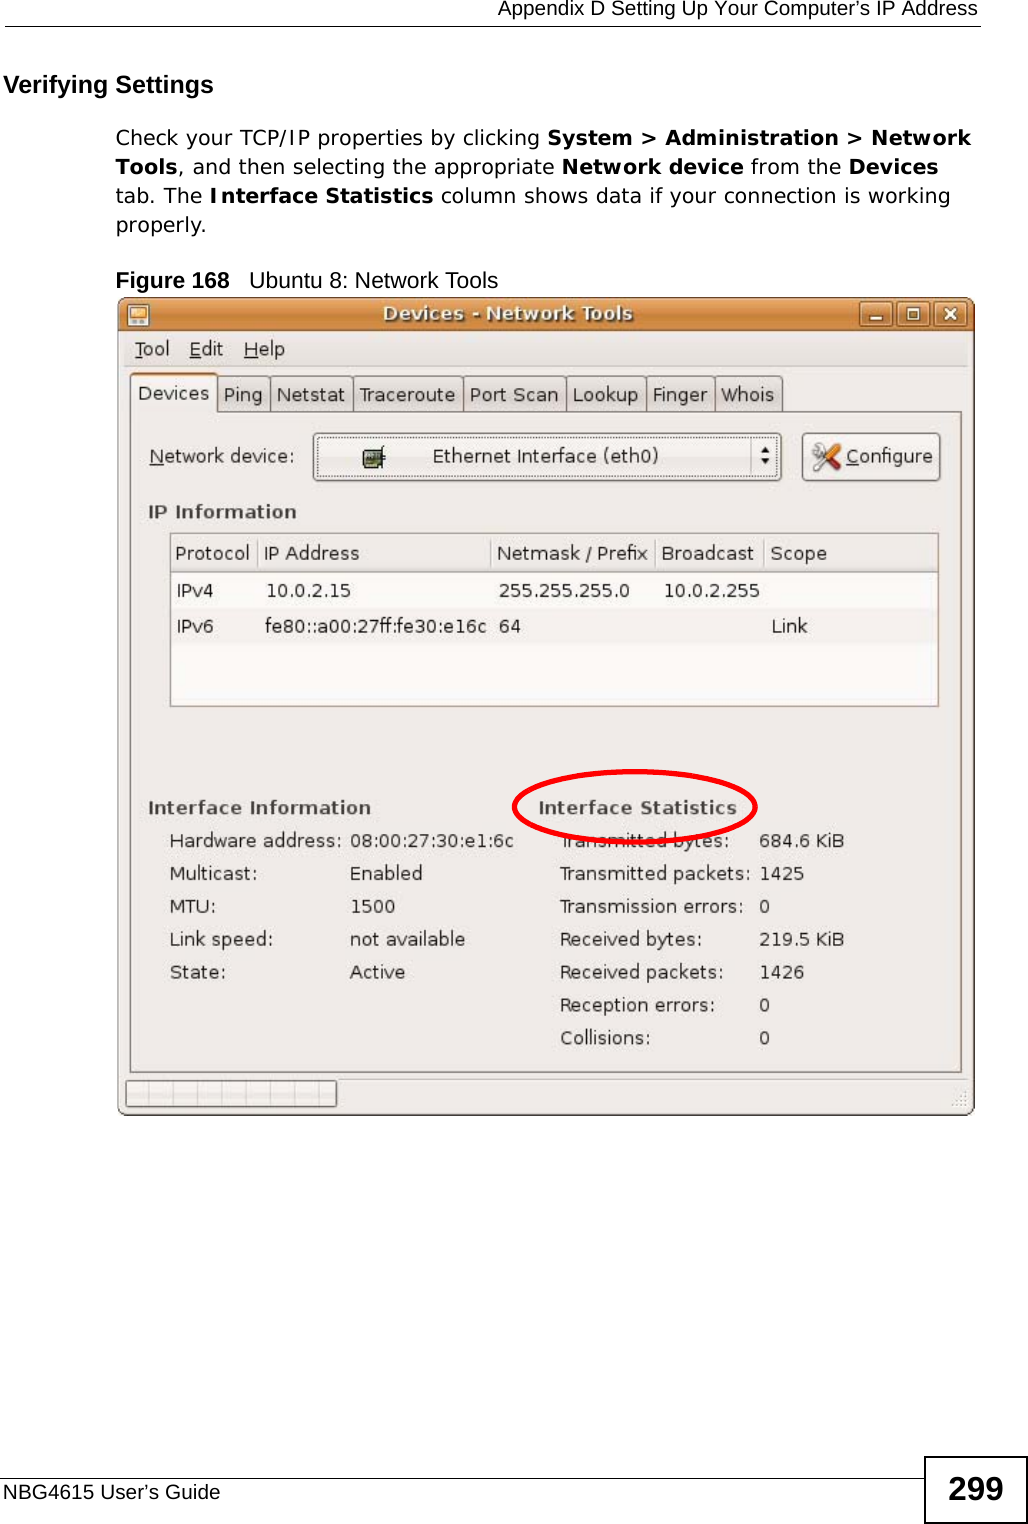  Appendix D Setting Up Your Computer’s IP AddressNBG4615 User’s Guide 299Verifying SettingsCheck your TCP/IP properties by clicking System &gt; Administration &gt; Network Tools, and then selecting the appropriate Network device from the Devices tab. The Interface Statistics column shows data if your connection is working properly.Figure 168   Ubuntu 8: Network Tools